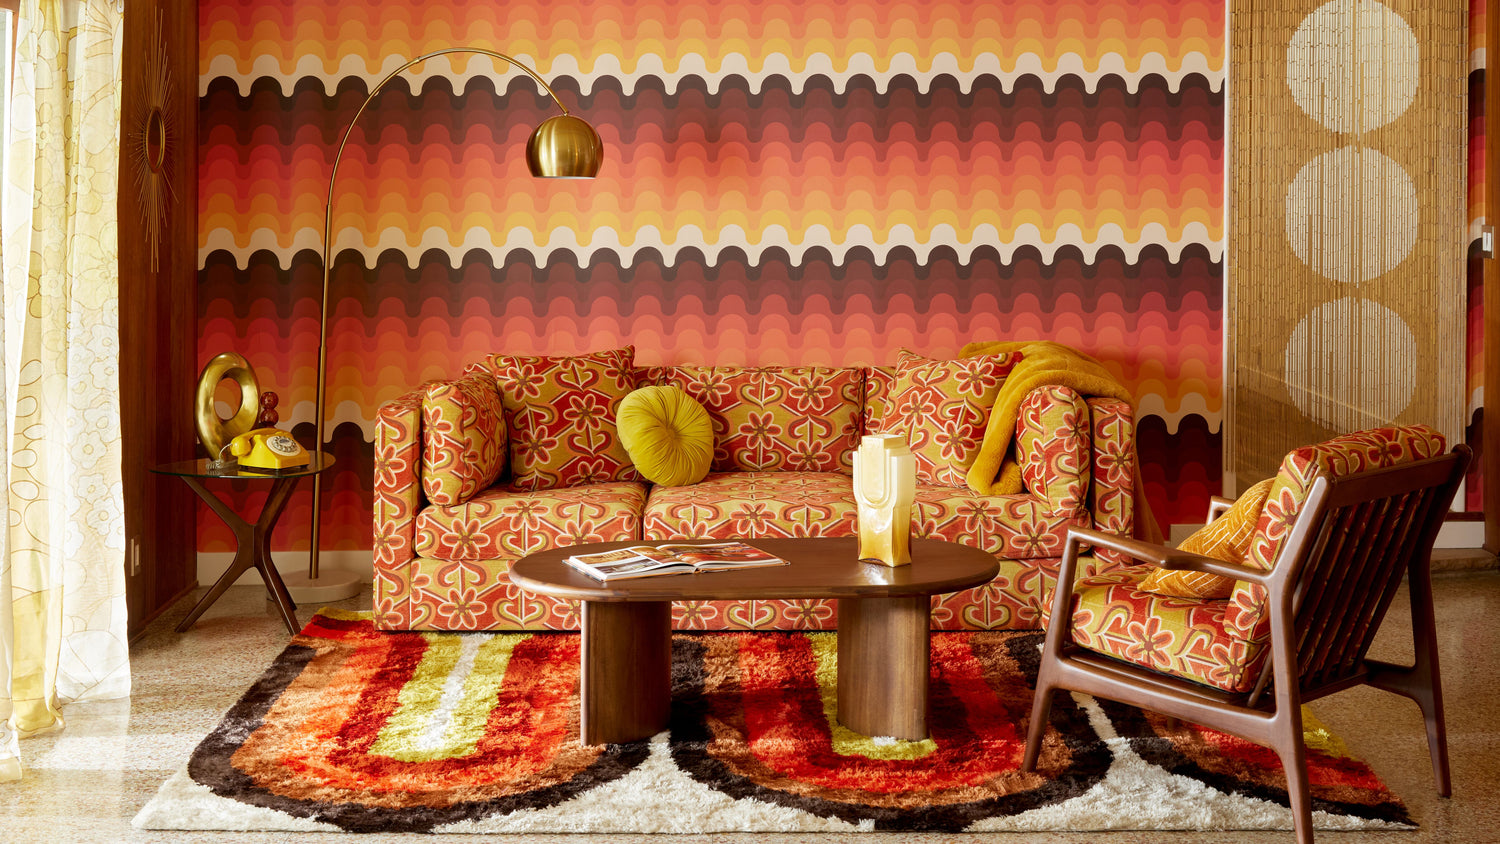 A retro living room features vibrant orange, red, and yellow patterns. The room includes a floral-patterned sofa with green cushions, a matching armchair, a wooden coffee table with magazines, a tall floor lamp, and a retro wall and carpet design.